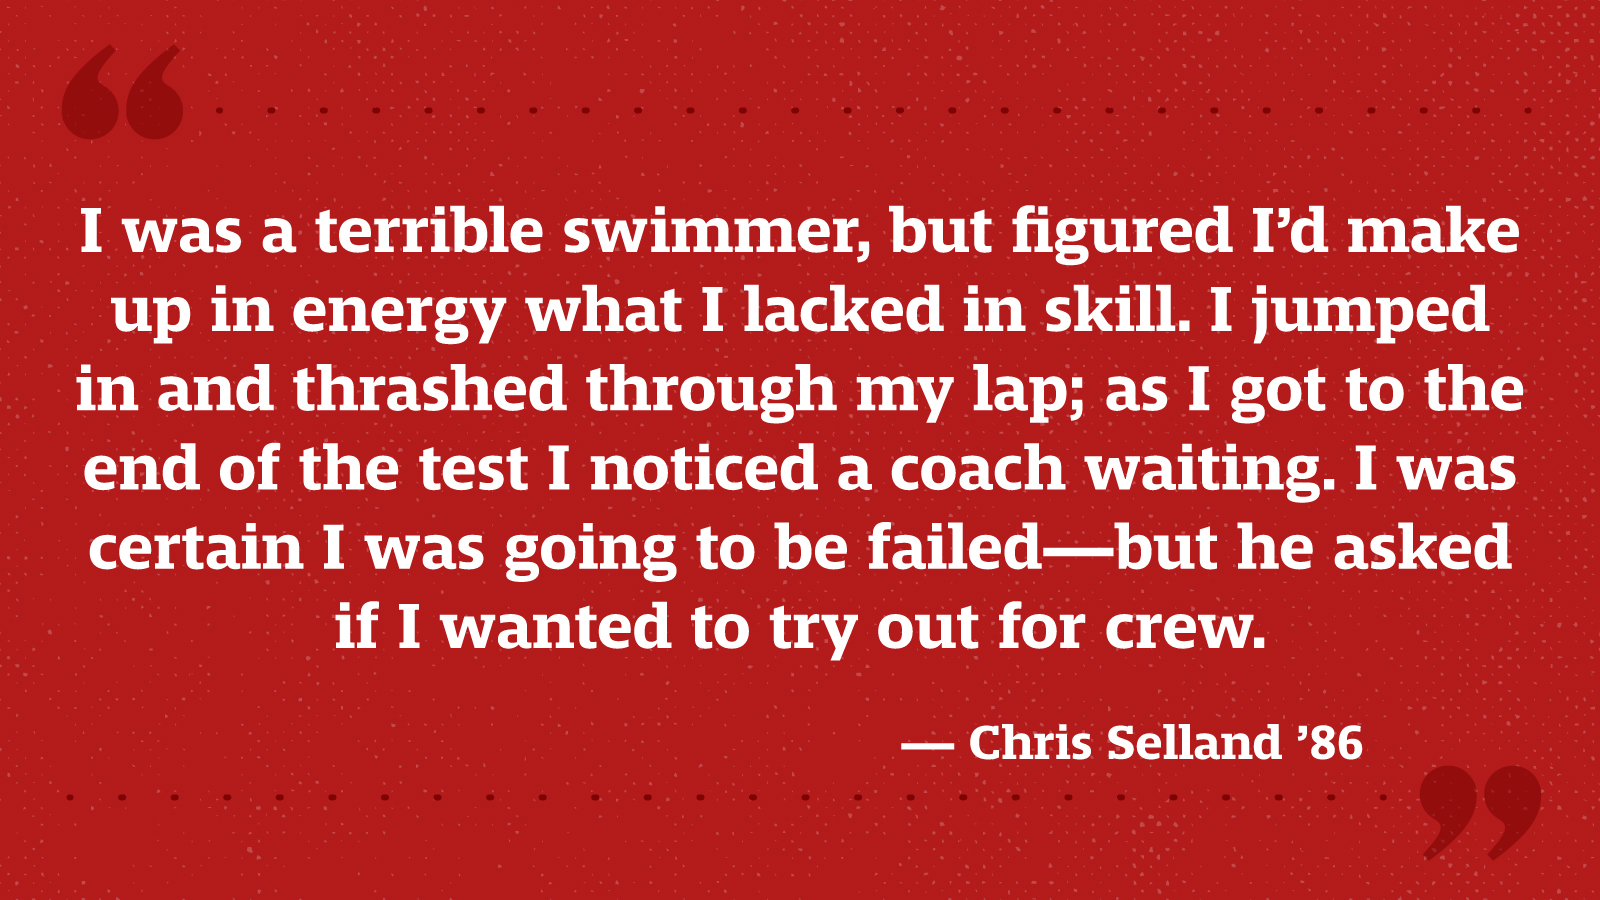 I was a terrible swimmer, but figured I’d make up in energy what I lacked in skill. I jumped in and thrashed through my lap; as I got to the end of the test I noticed a coach waiting. I was certain I was going to be failed—but he asked if I wanted to try out for crew. — Chris Selland ’86